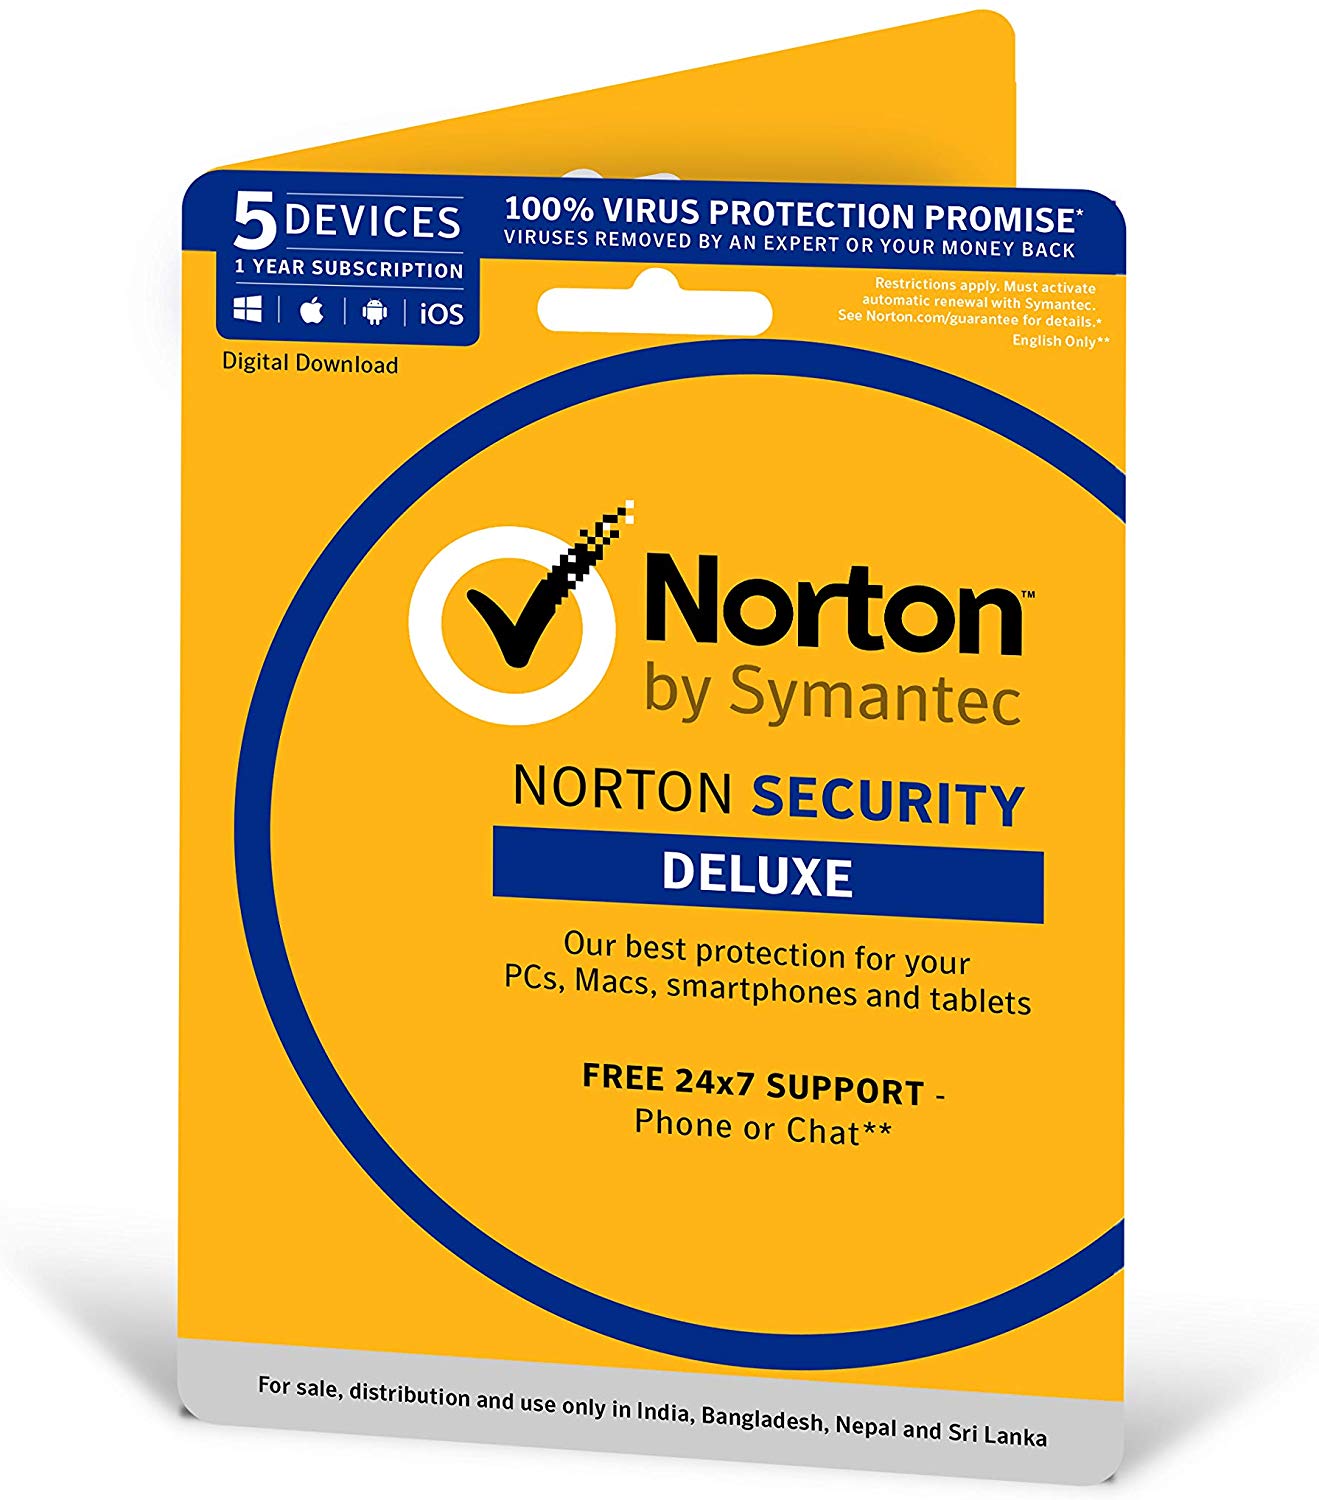 Norton Security Deluxe - 5 Devices - 1 Year (PC, Mac, Android, IOS) (Email Delivery in 2 Hours - No CD)-CLASSIBLOGGER